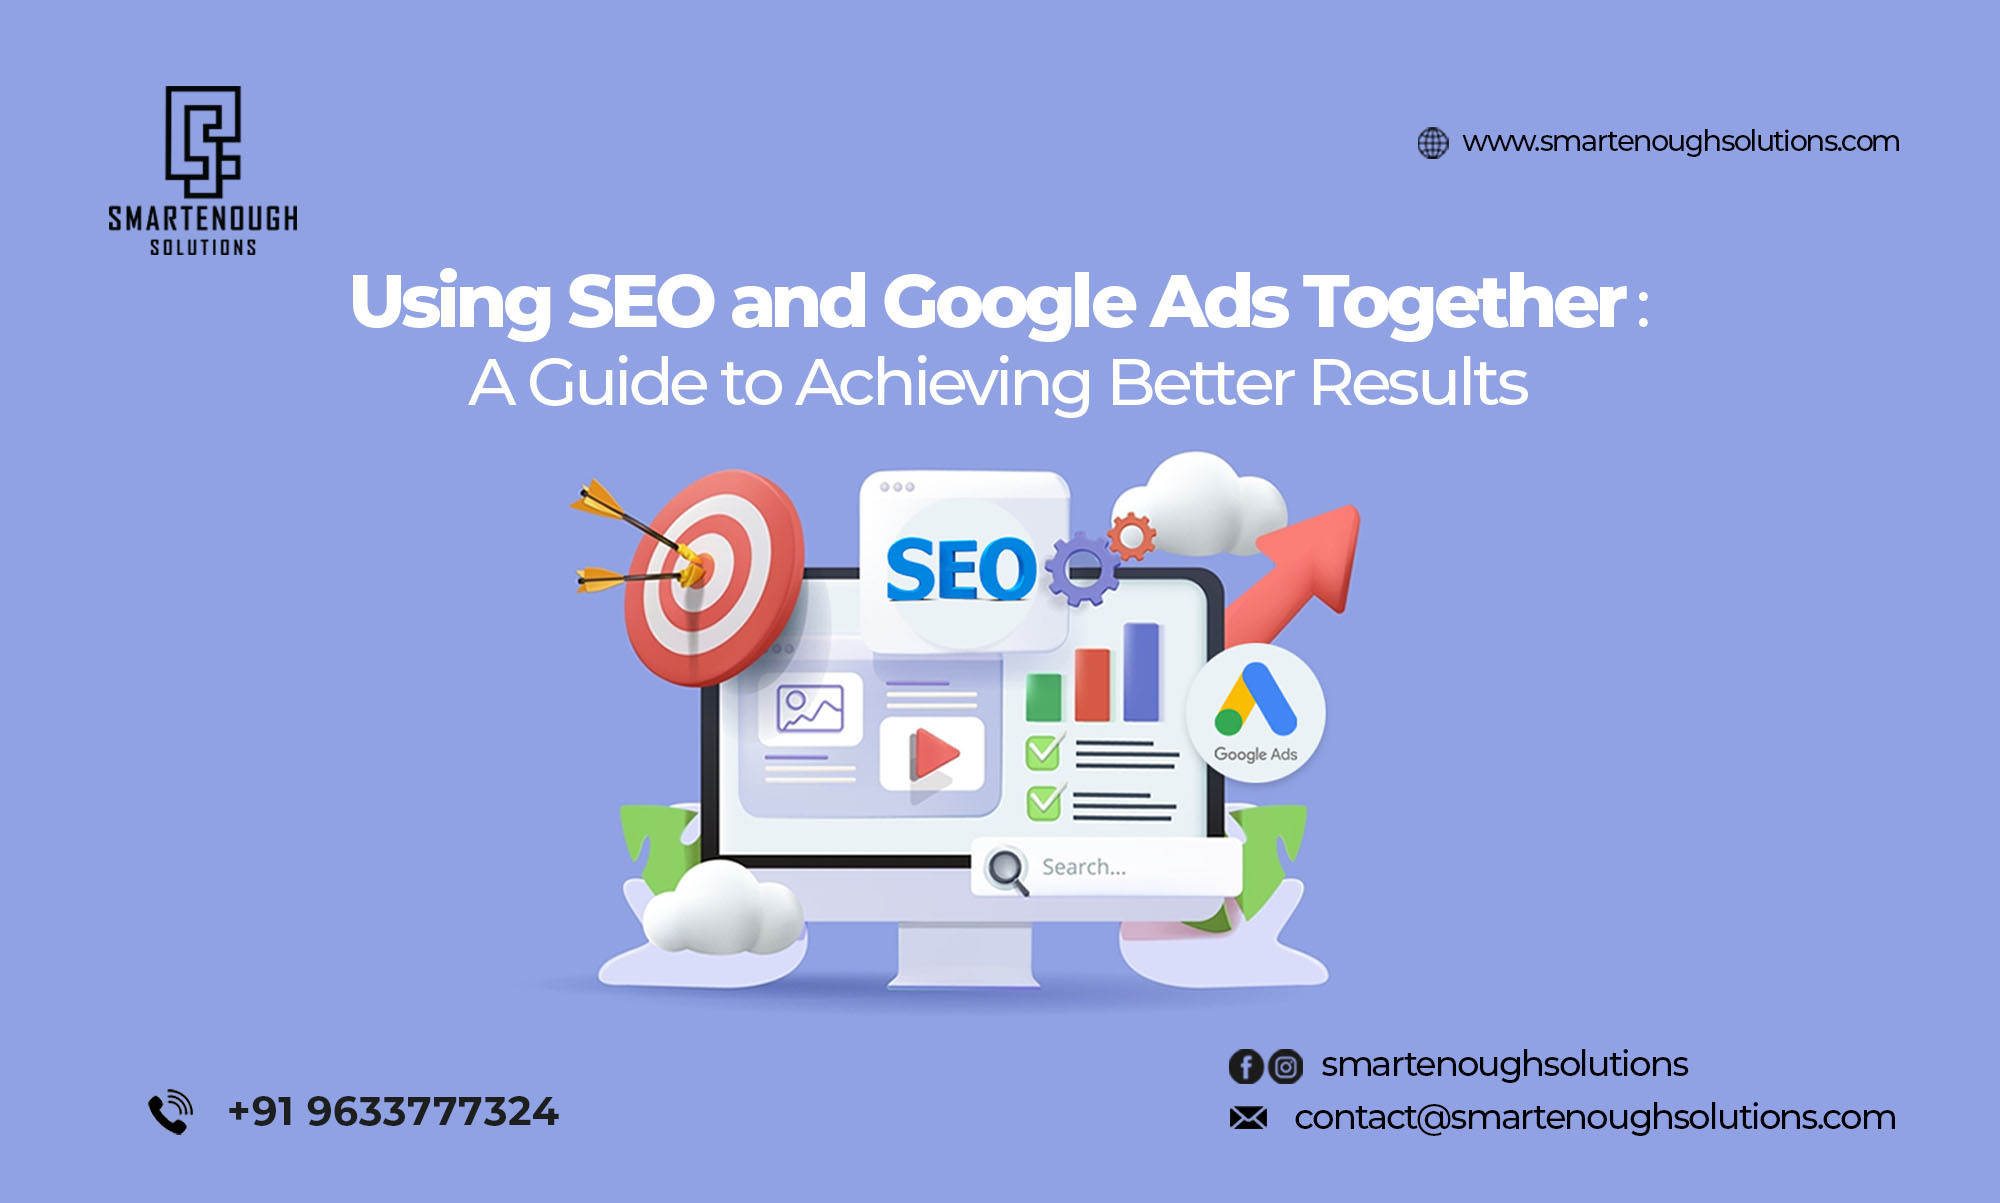 Using SEO and Google Ads Together: A Guide to Achieving Better Results